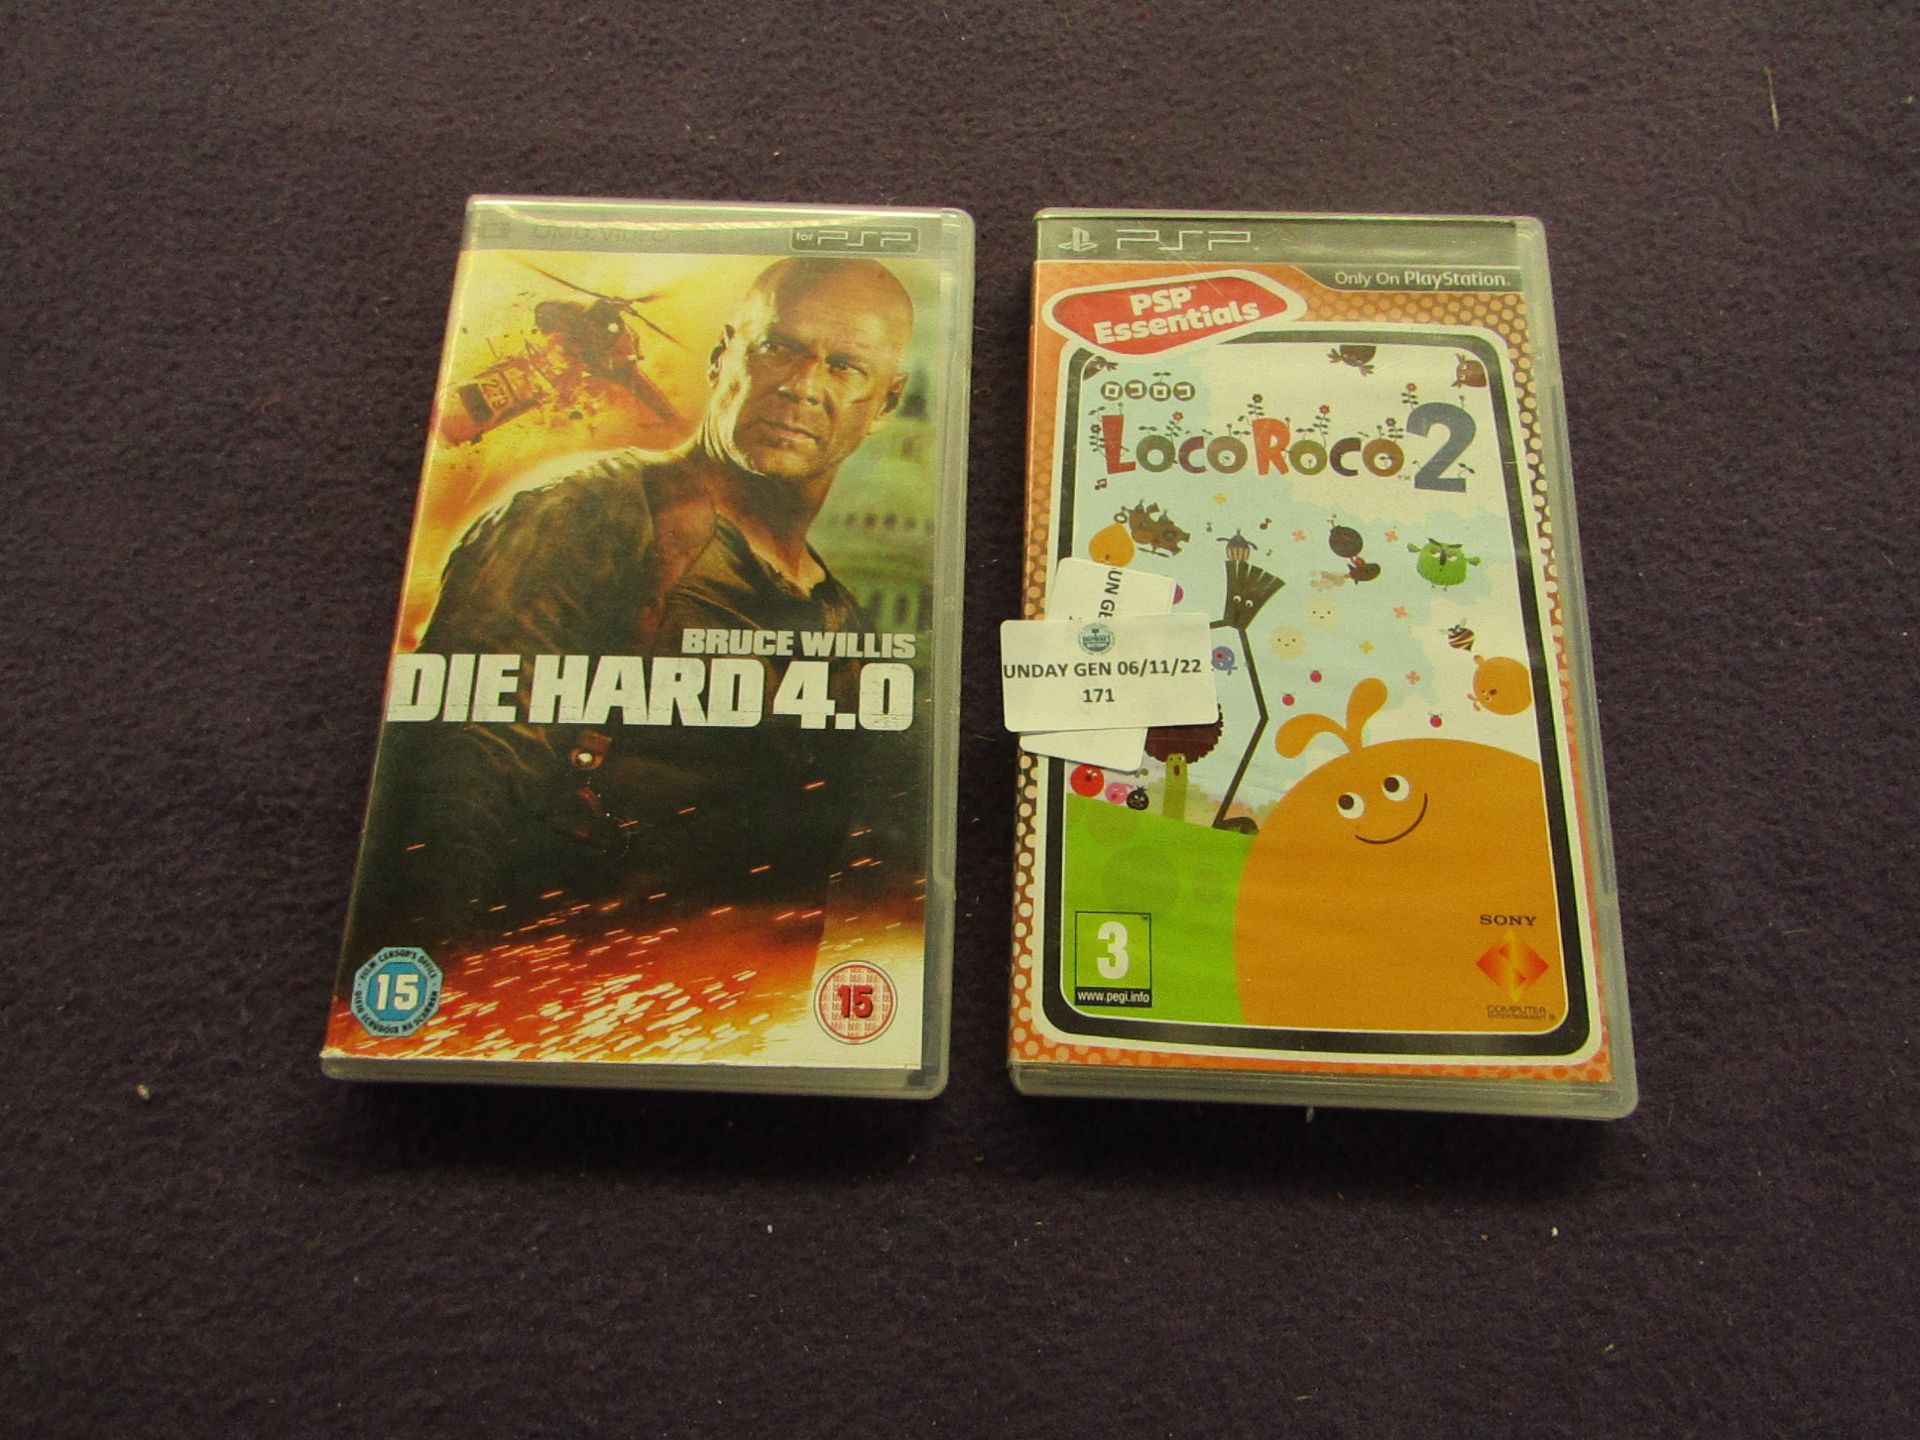 2x Various PSP Games : 1x Die Hard 4.0 1x LocoRoco 2 - Unchecked.